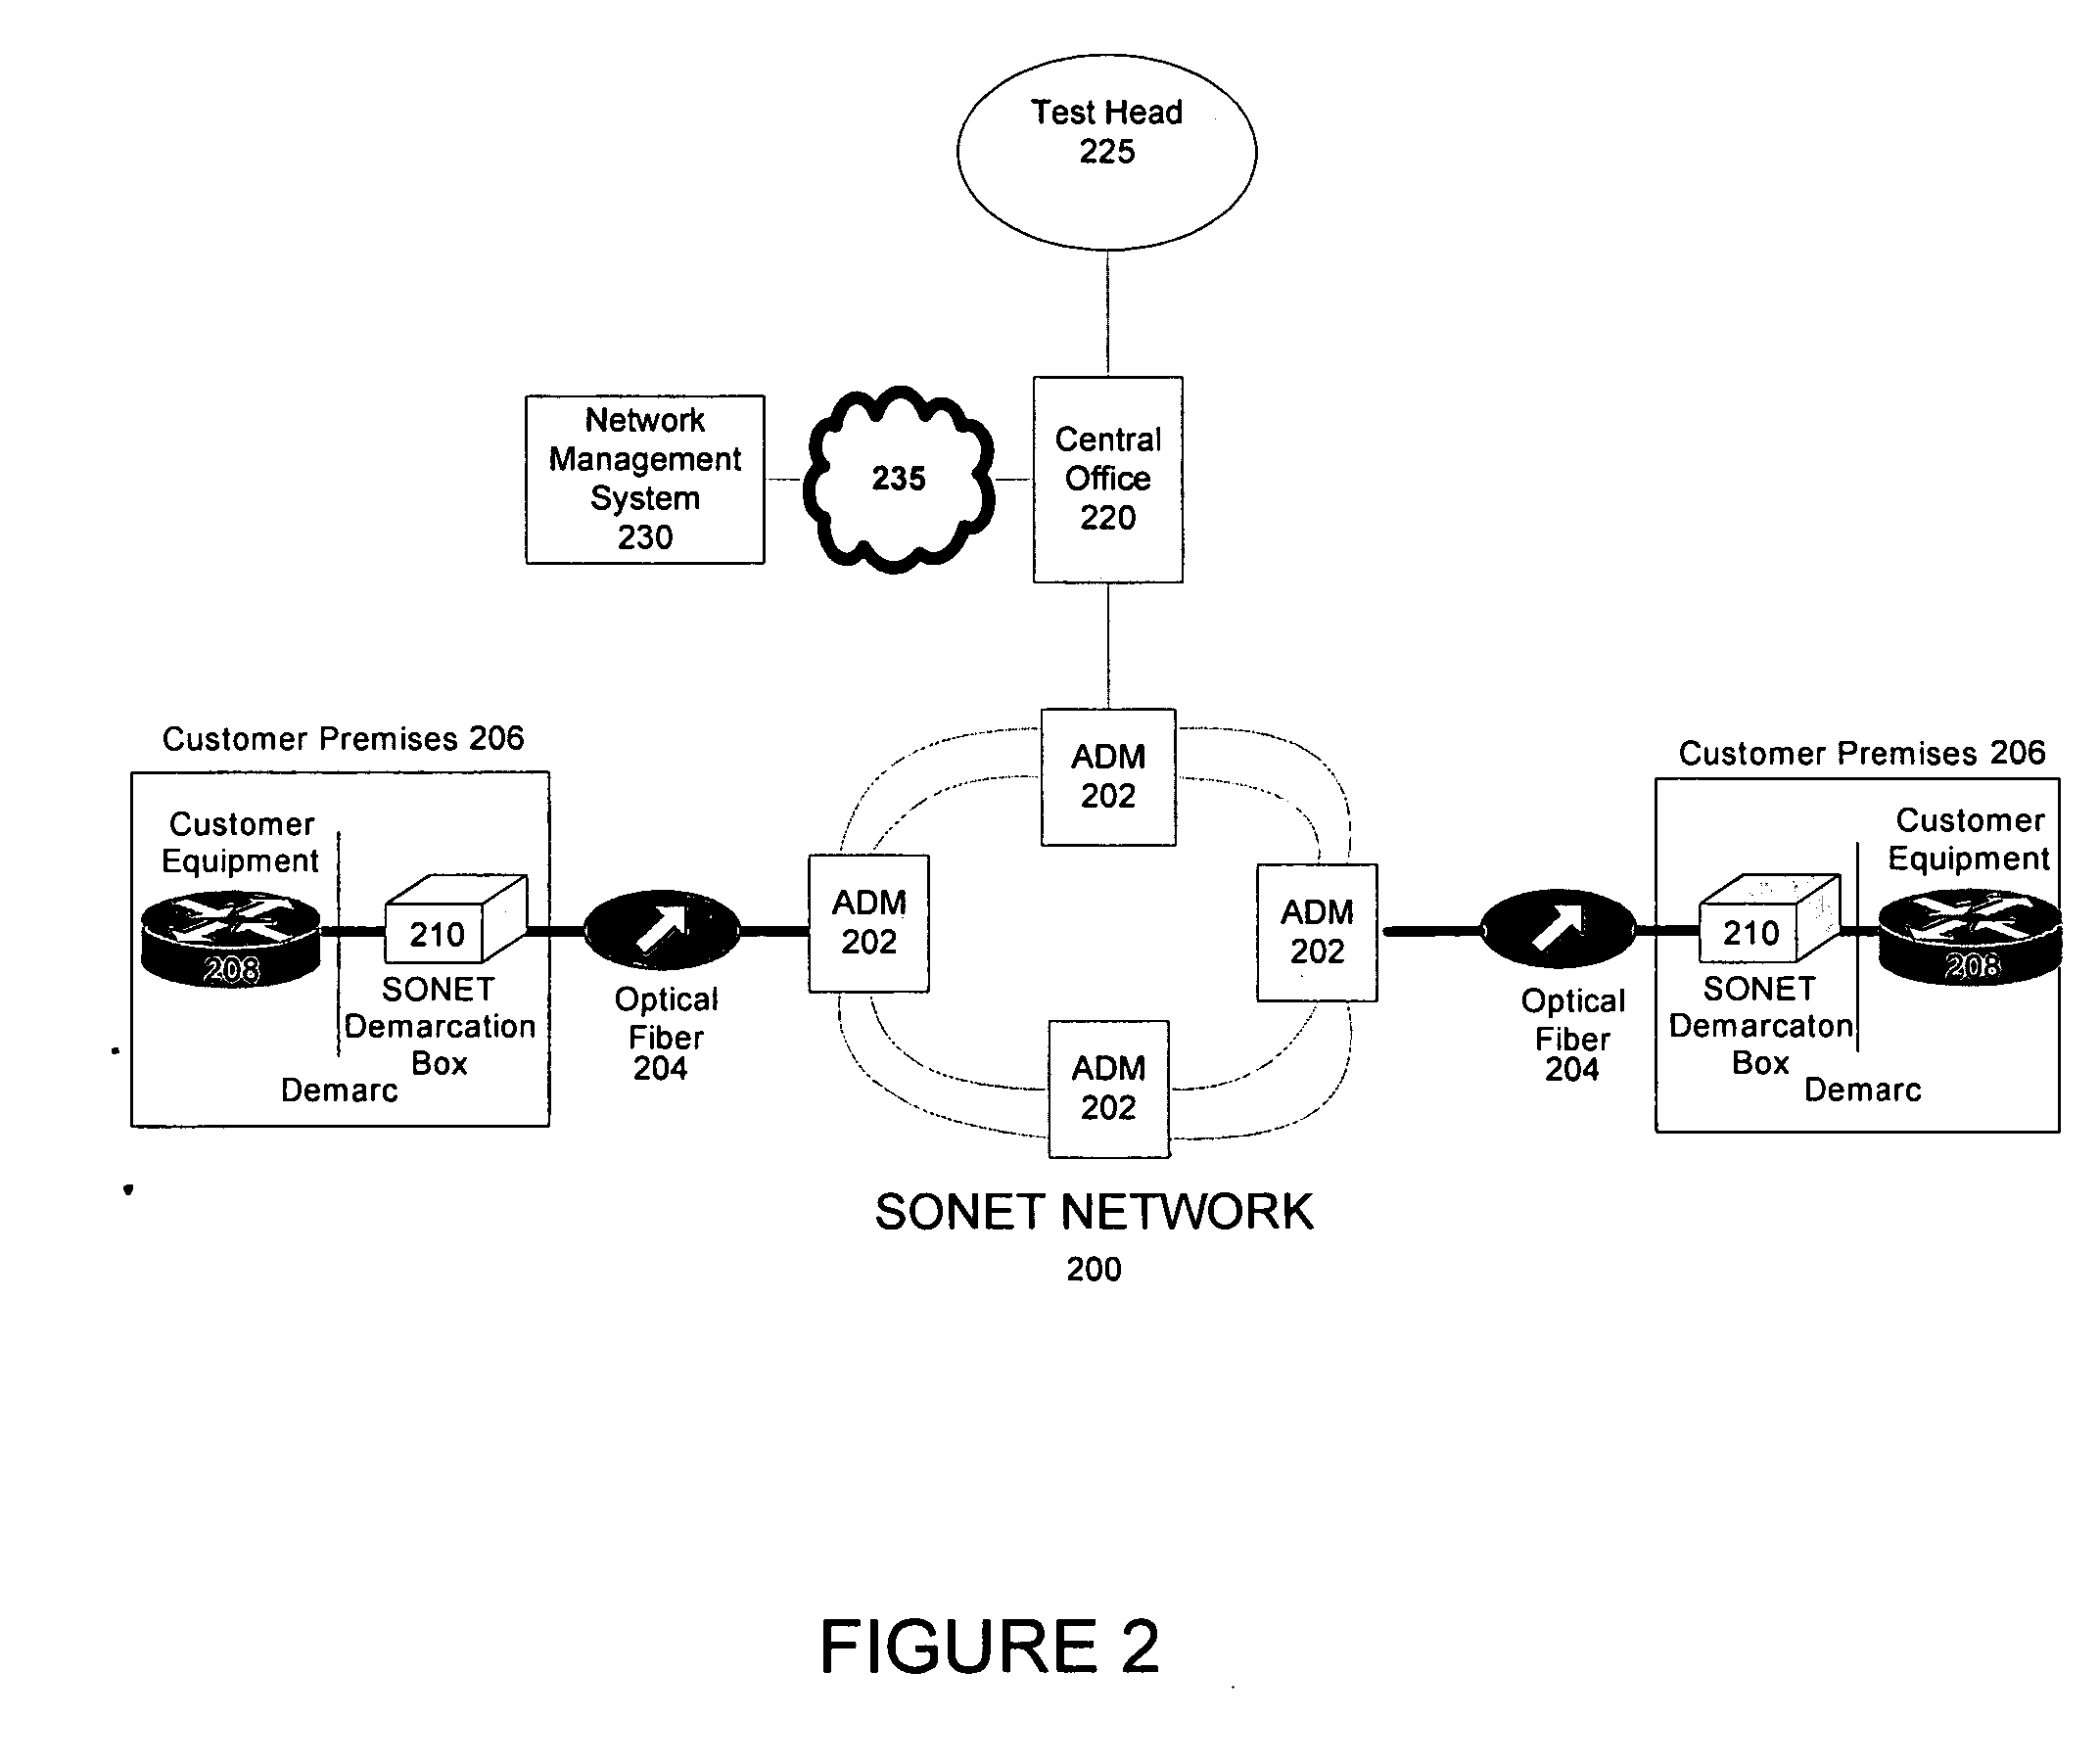 Synchronous optical network (SONET) demarcation device